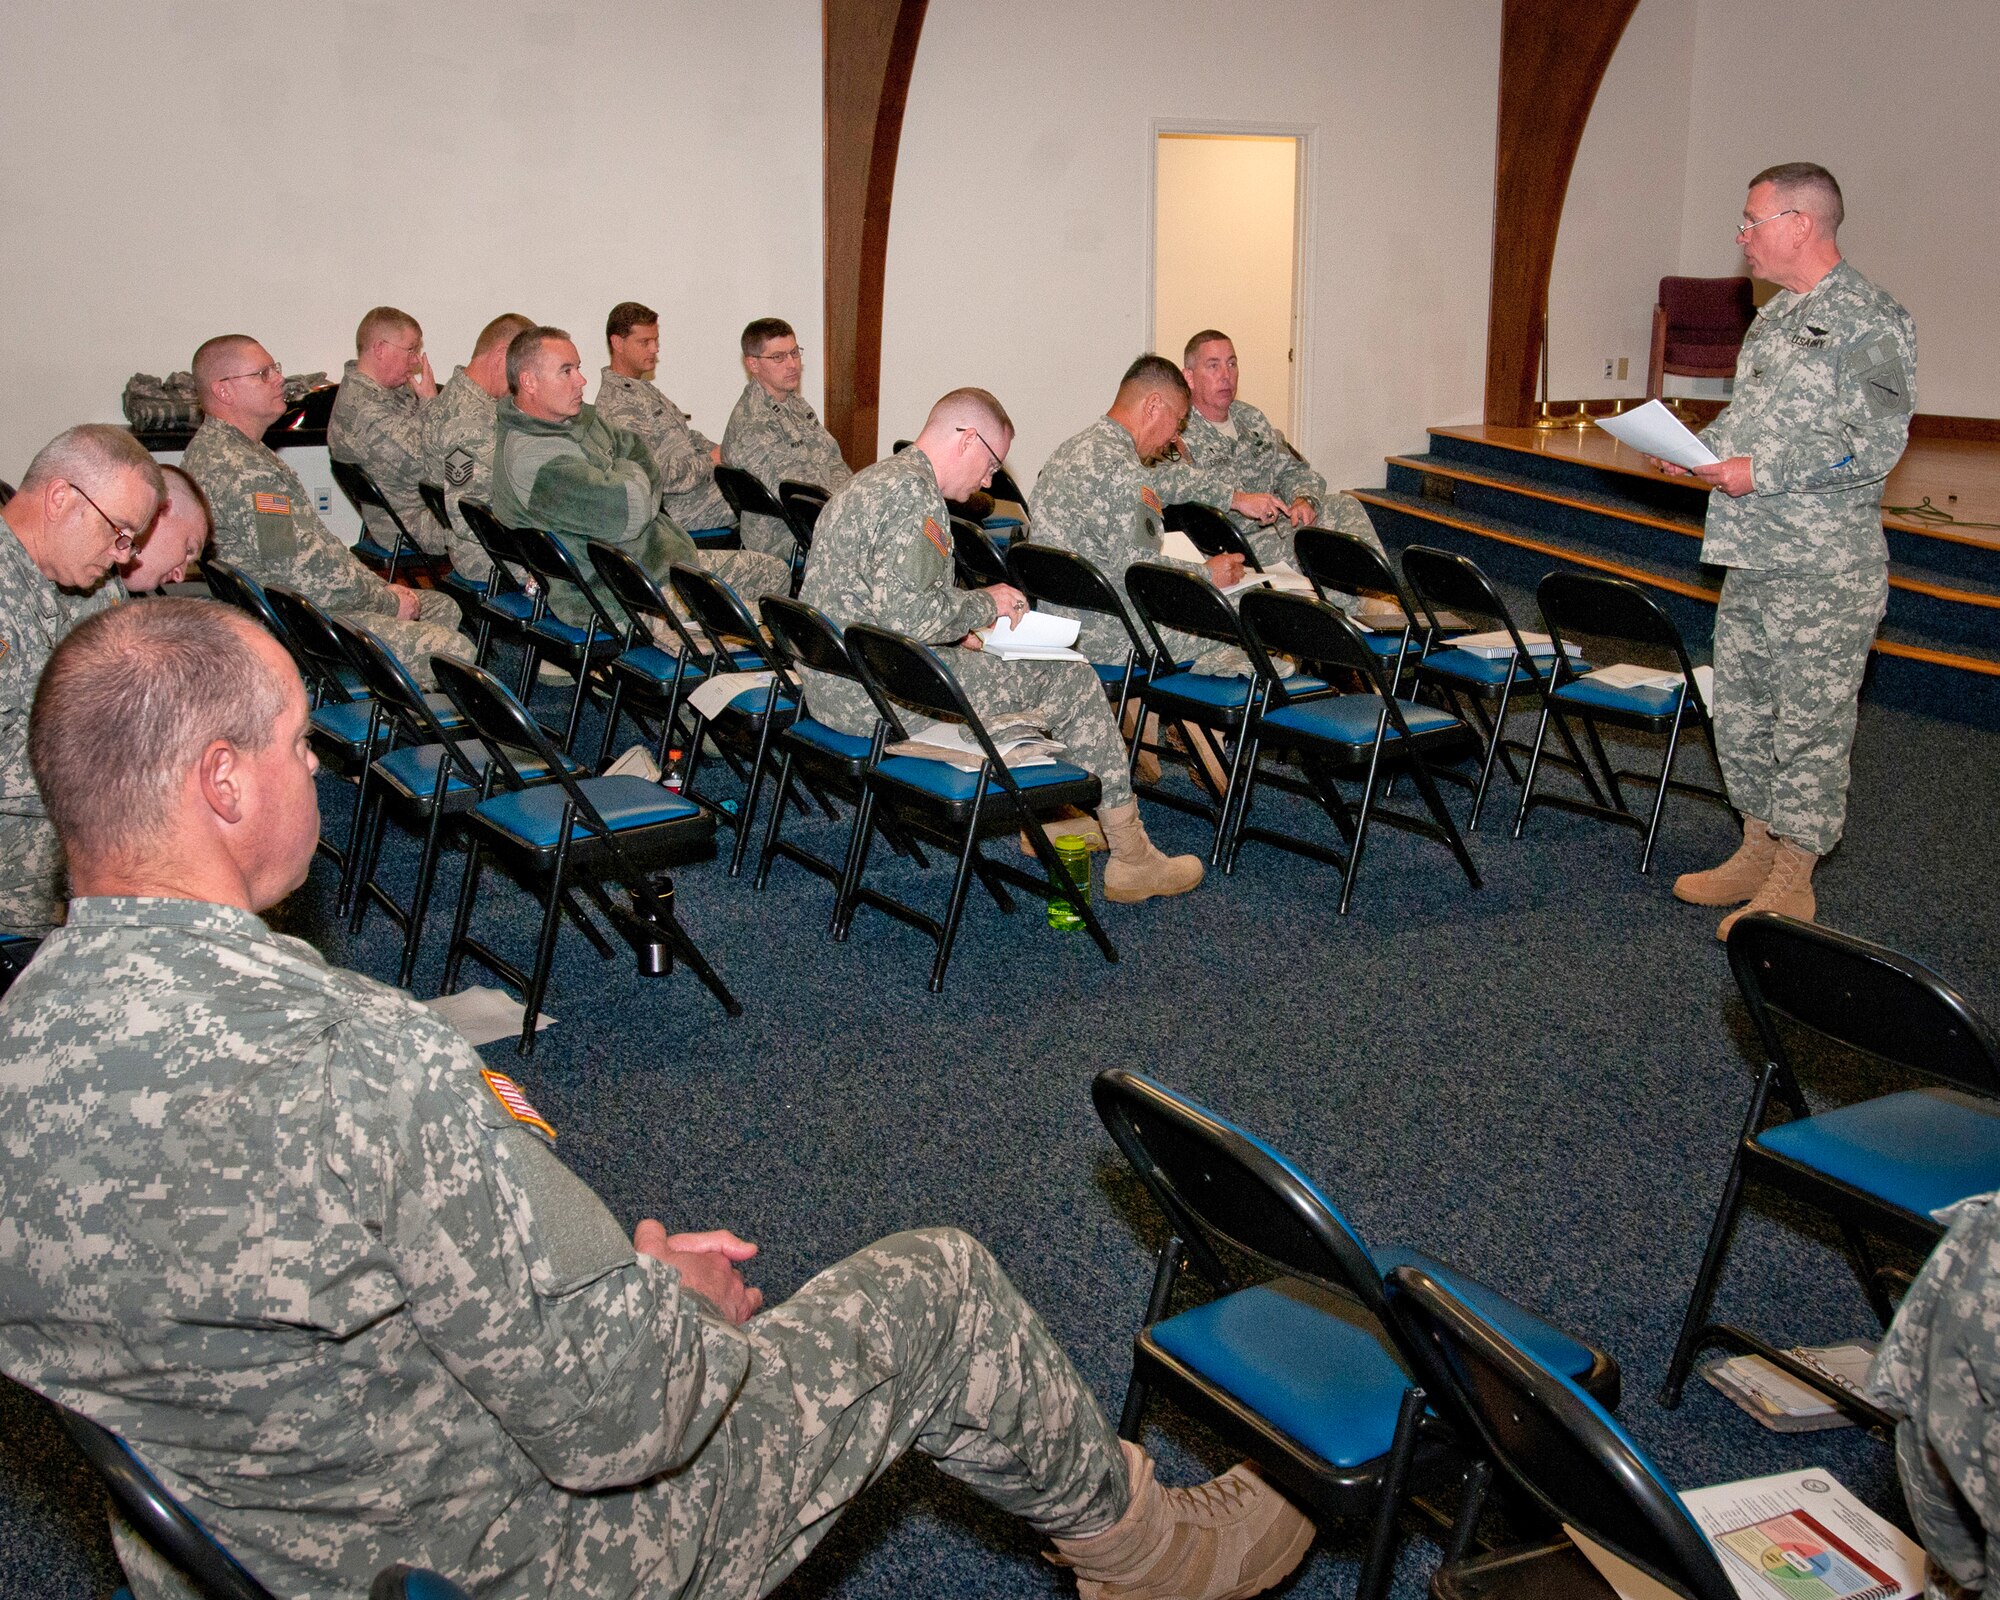 Chaplain (Col.) David Graetz, Kentucky Joint Forces Headquarters chaplain, answers questions from fellow chaplains, chaplain candidates, and assistants during the annual Joint Chaplaincy Corps Training Conference held at the Kentucky Air National Guard Base on Oct. 15. The corps uses the conference to prepare for upcoming events, new programs and policy changes such as the recent repeal of Don't Ask, Don't Tell.  (U.S. Air Force photo by Tech Sgt. Jason Ketterer)